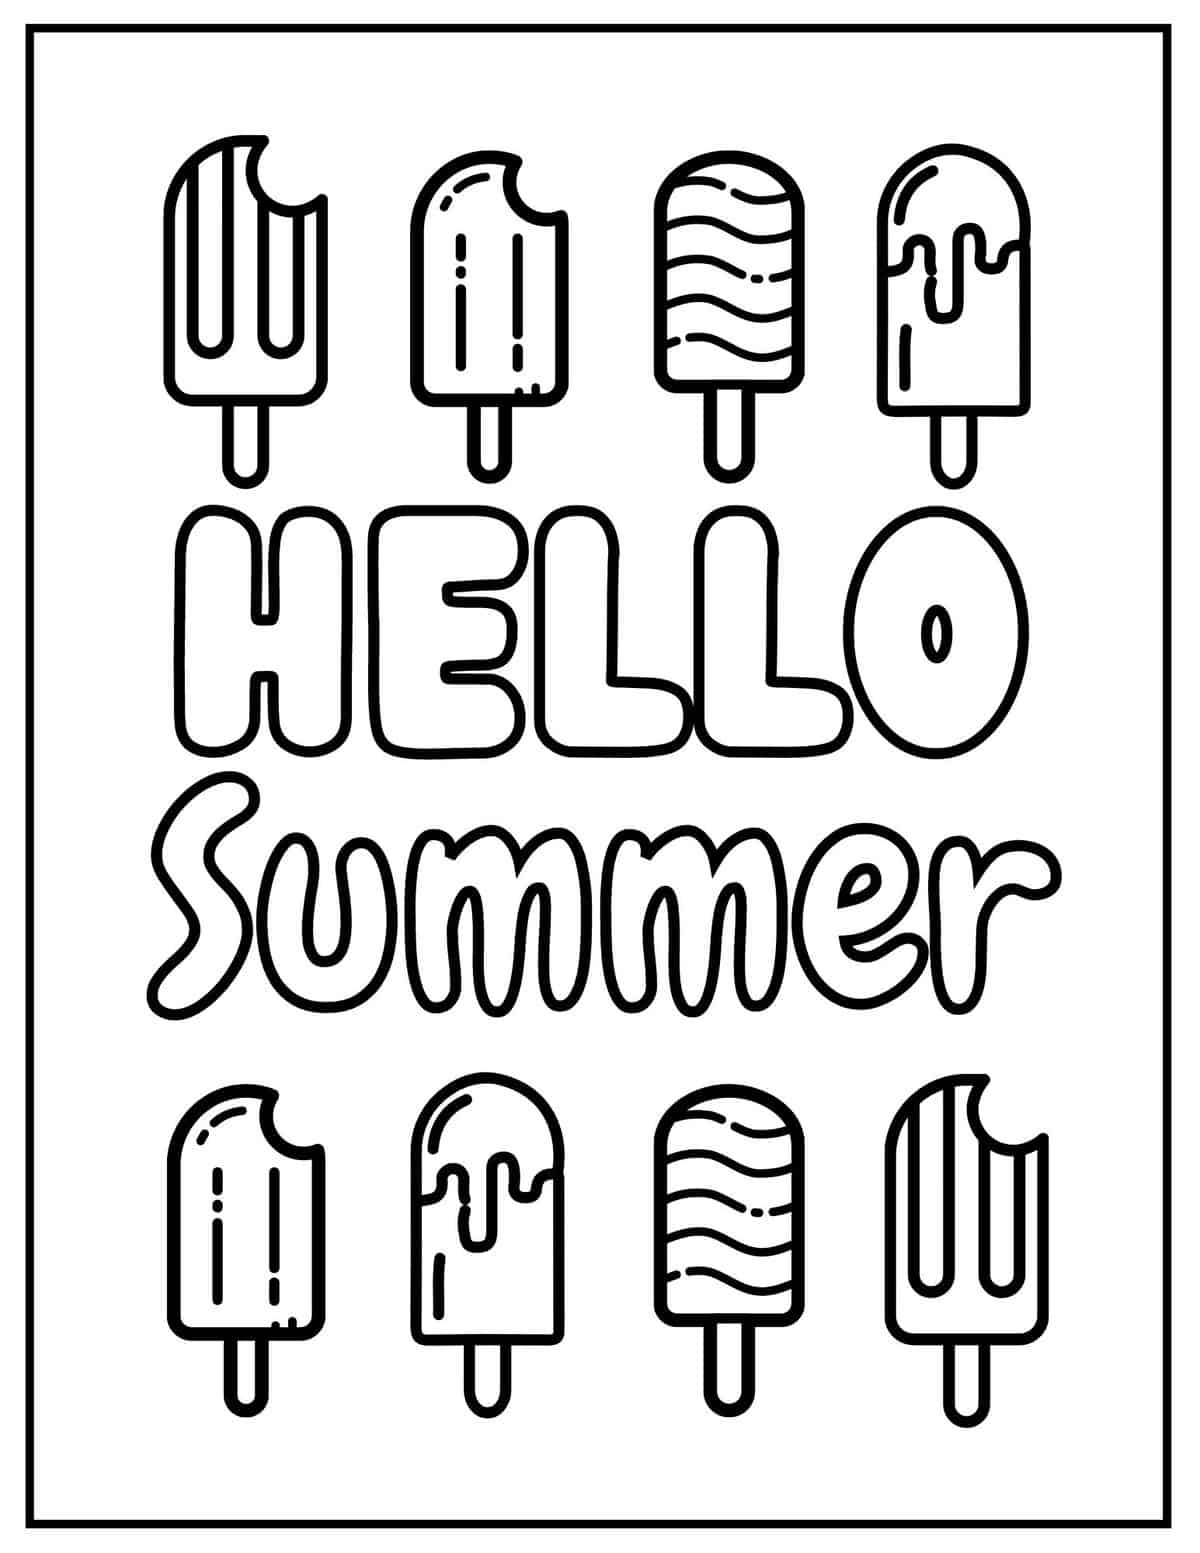 https://www.prudentpennypincher.com/wp-content/uploads/2022/04/hello-summer-popsicle-coloring-page.jpeg